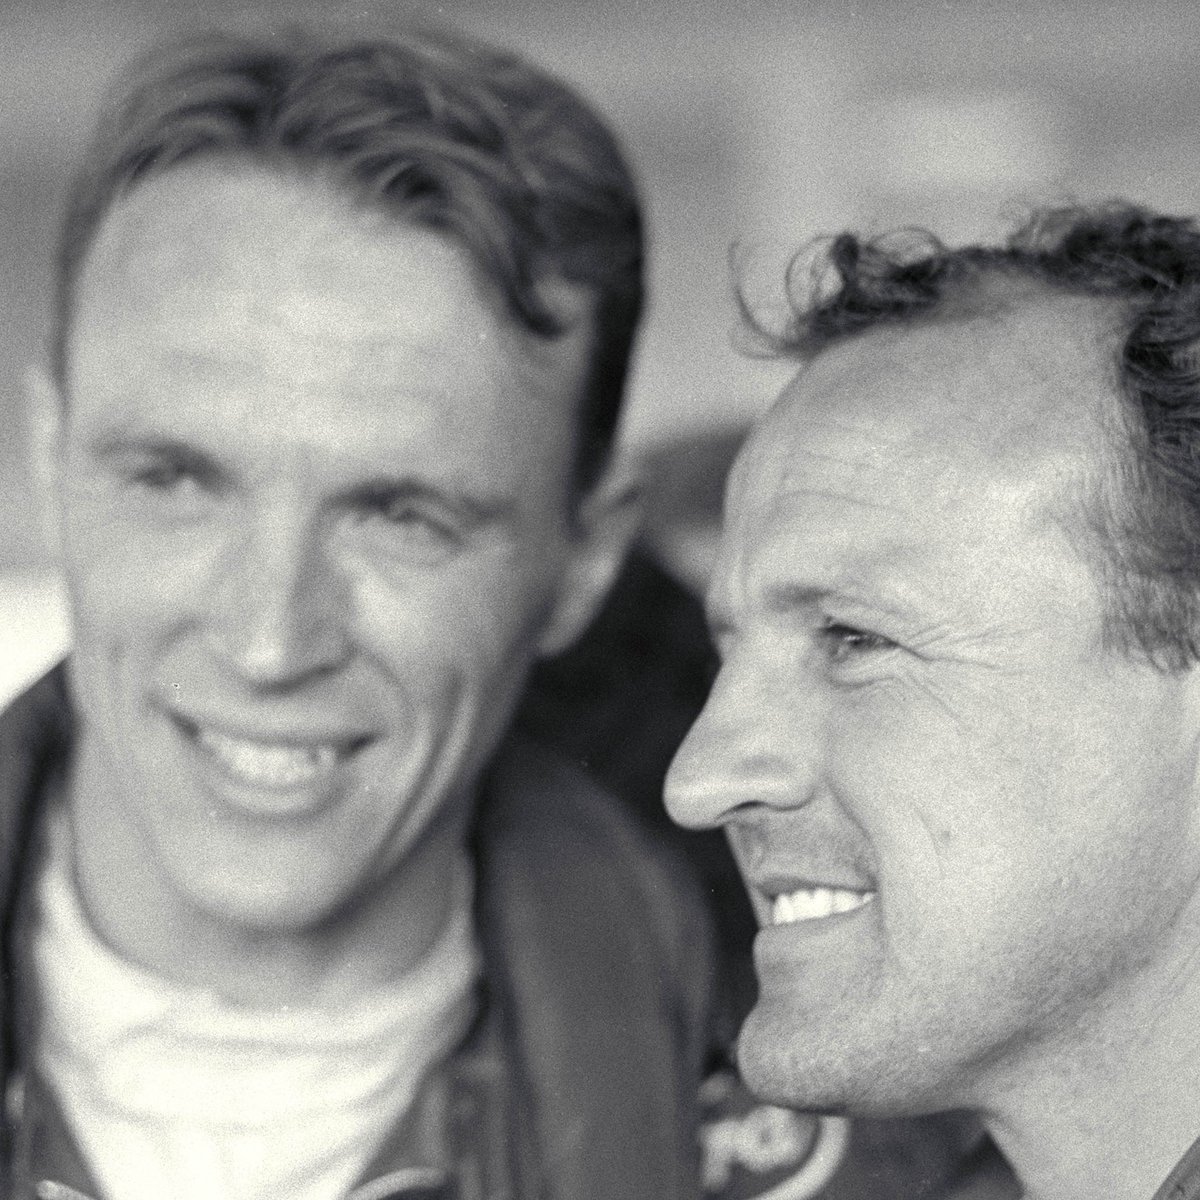 On this day in 1967, Dan Gurney and A.J. Foyt won the 24 Hours of Le Mans marking the only time an All-American team has ever won the event #FordFact